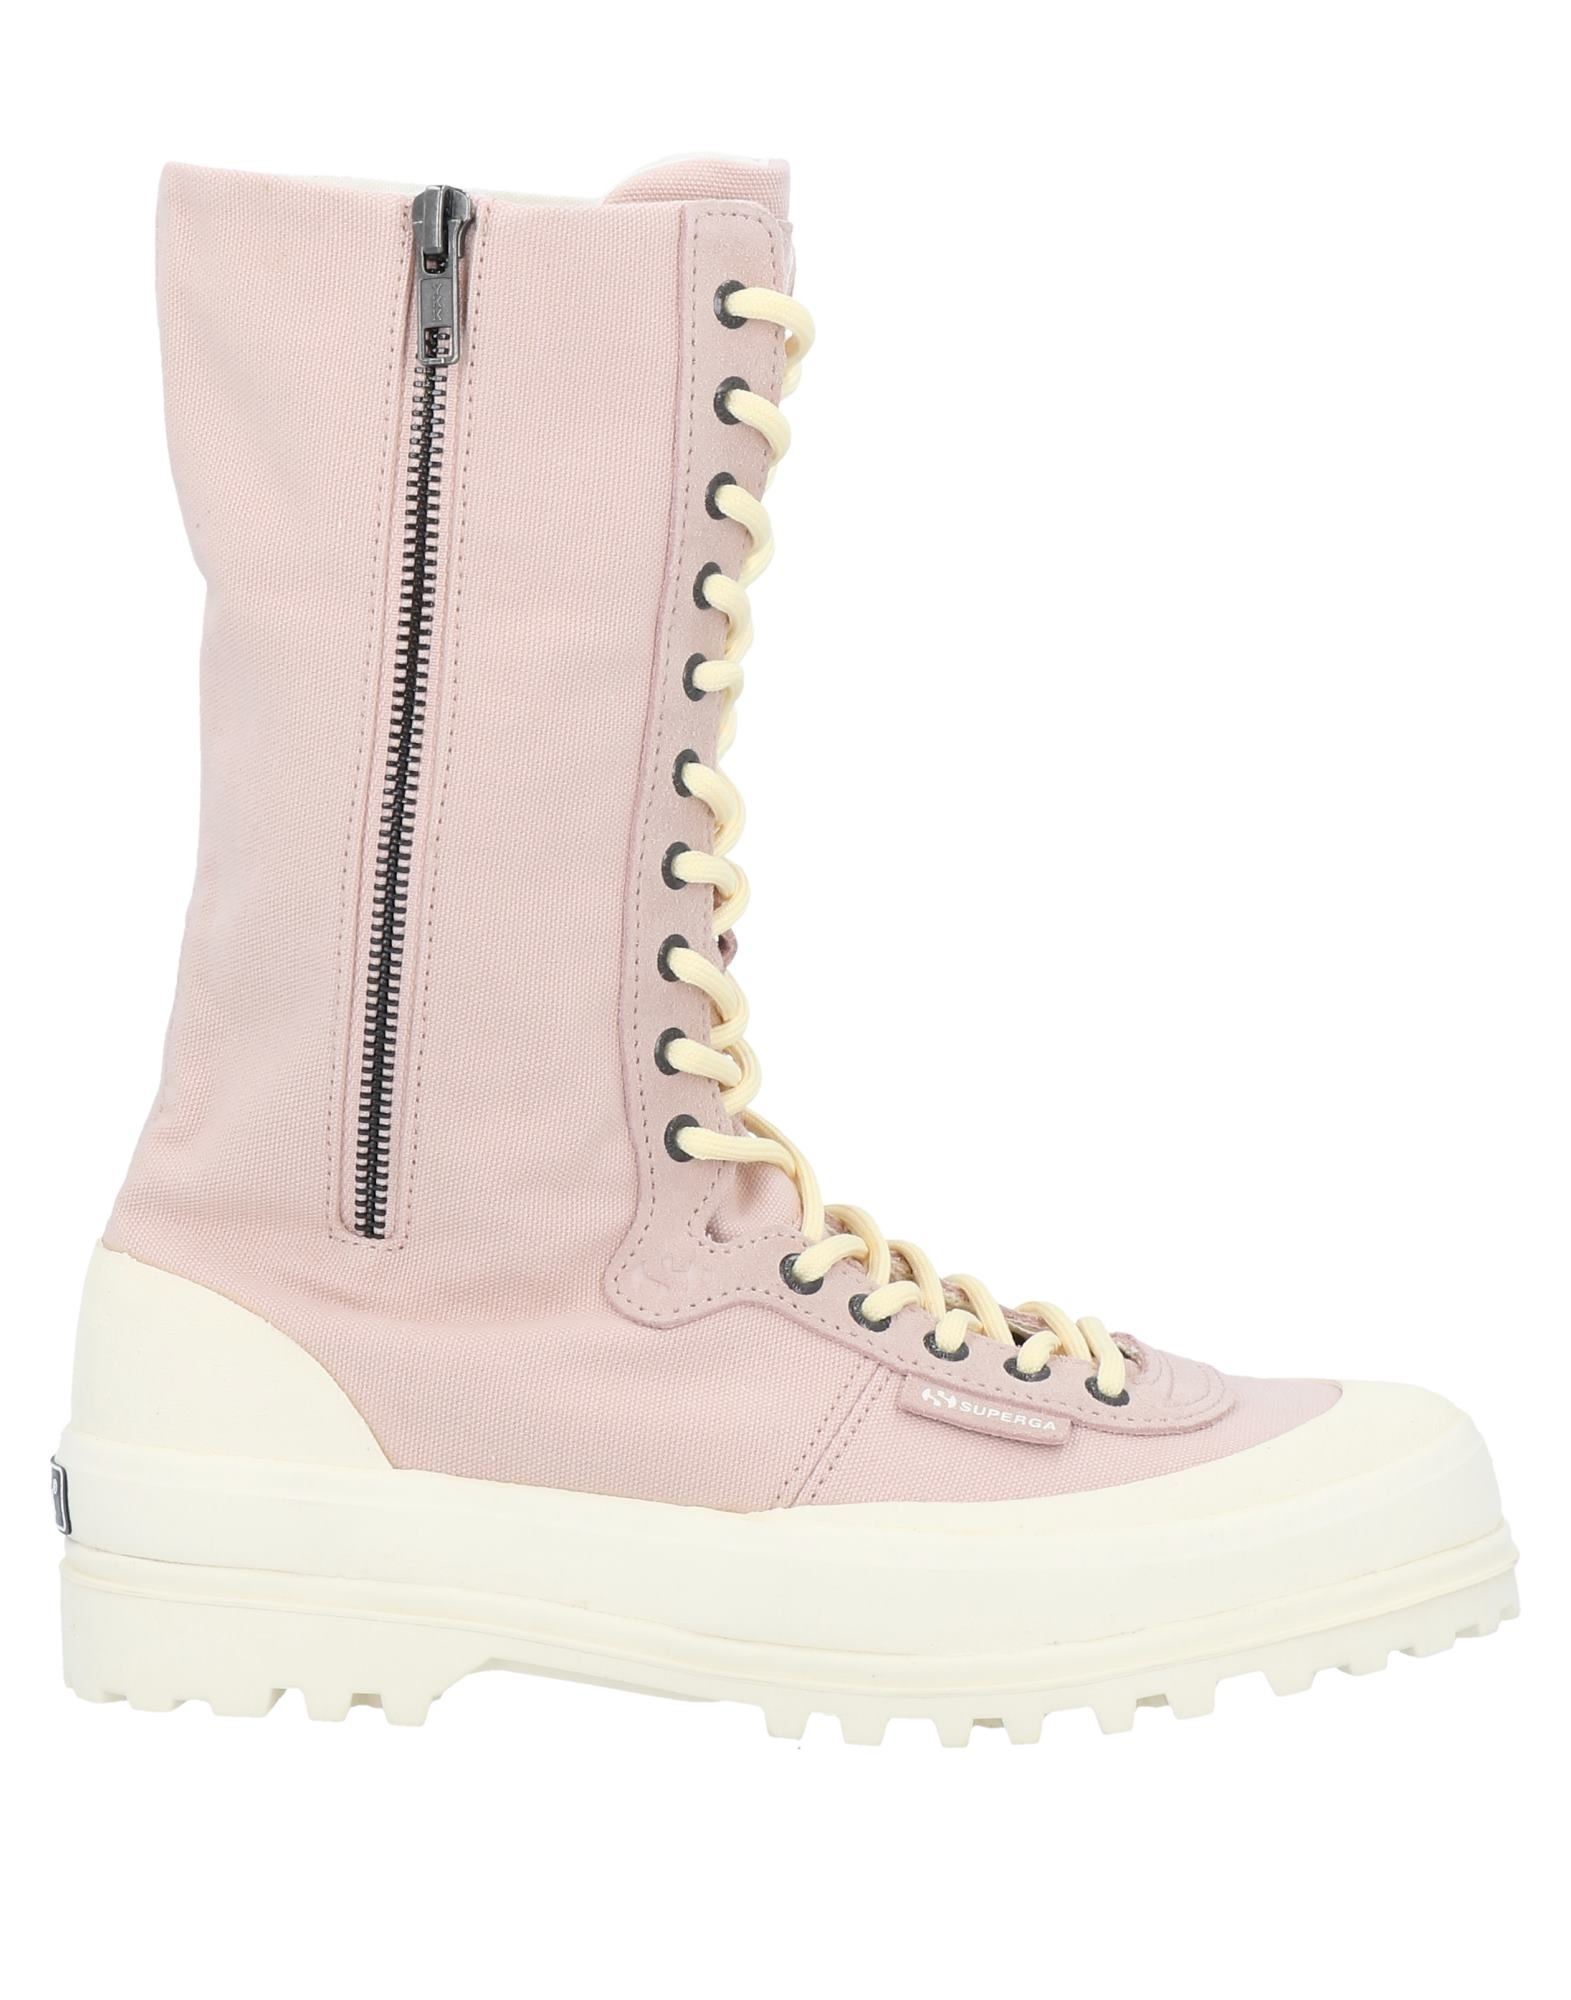 Paura X Superga Ankle Boots In Pink